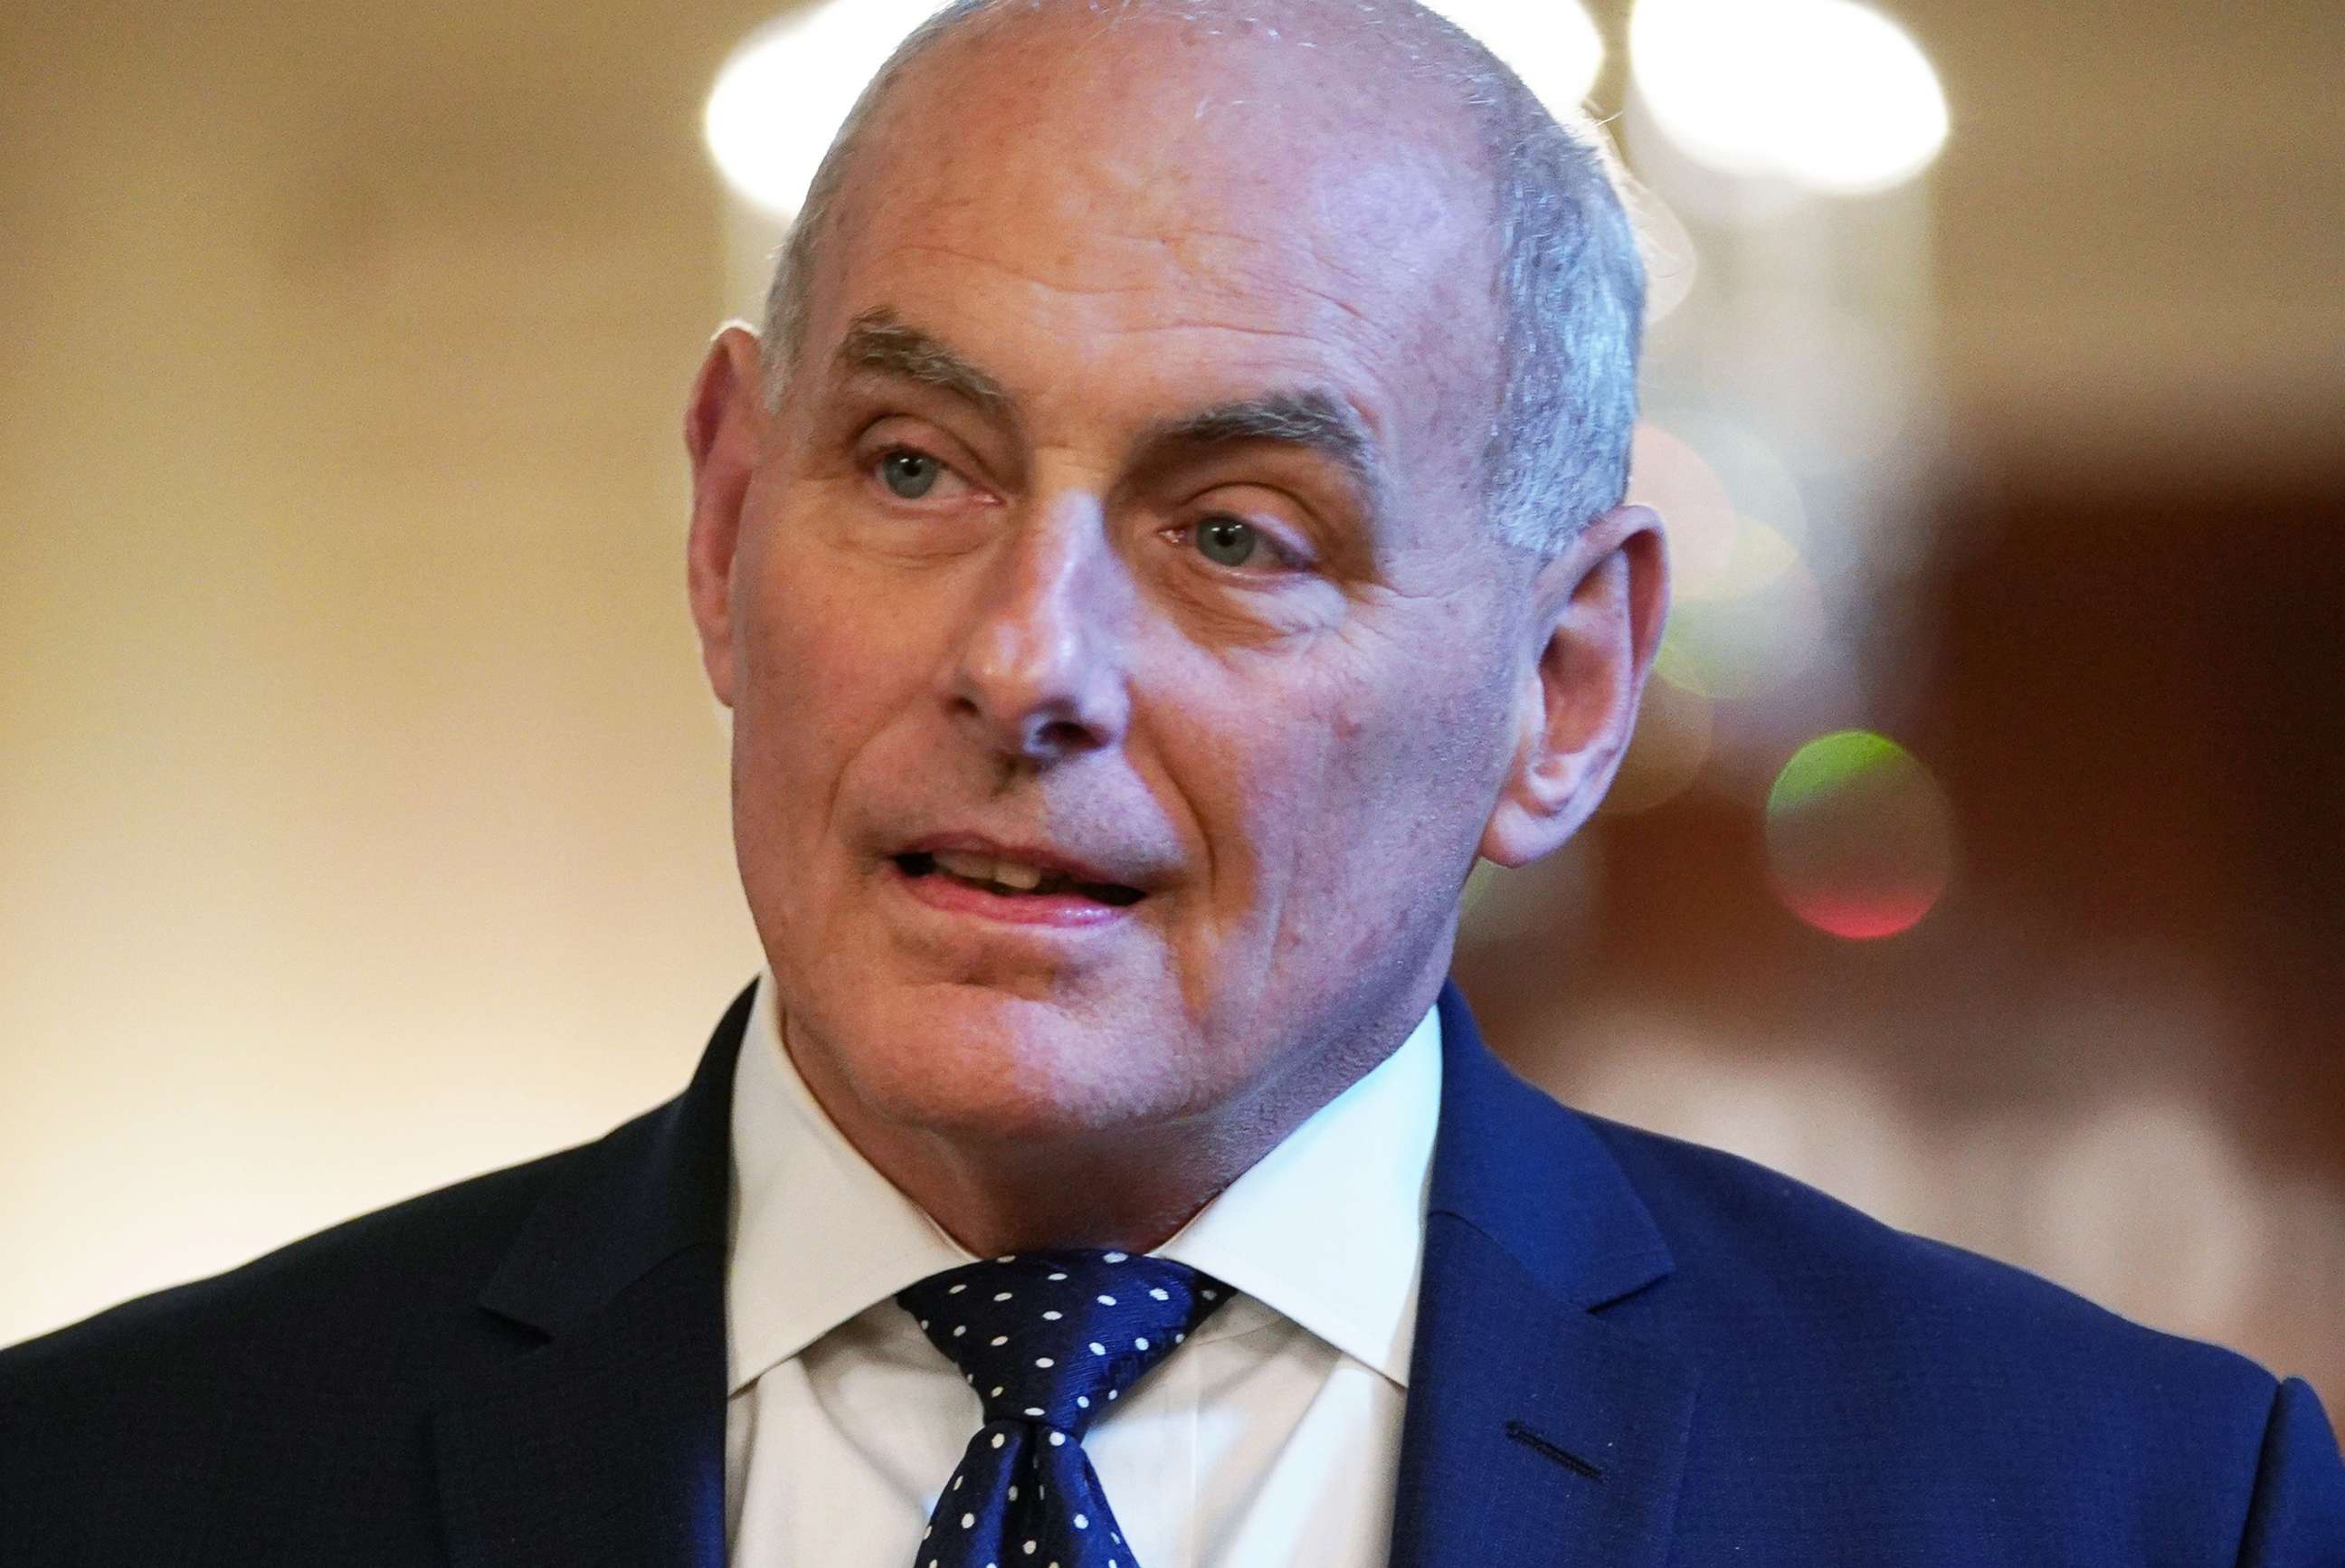 PHOTO: In this Aug. 20, 2018, file photo, White House Chief of Staff John Kelly is seen during an event honoring the Immigration and Customs Enforcement and Customs and Border Protection services in the East Room of the White House in Washington, DC.